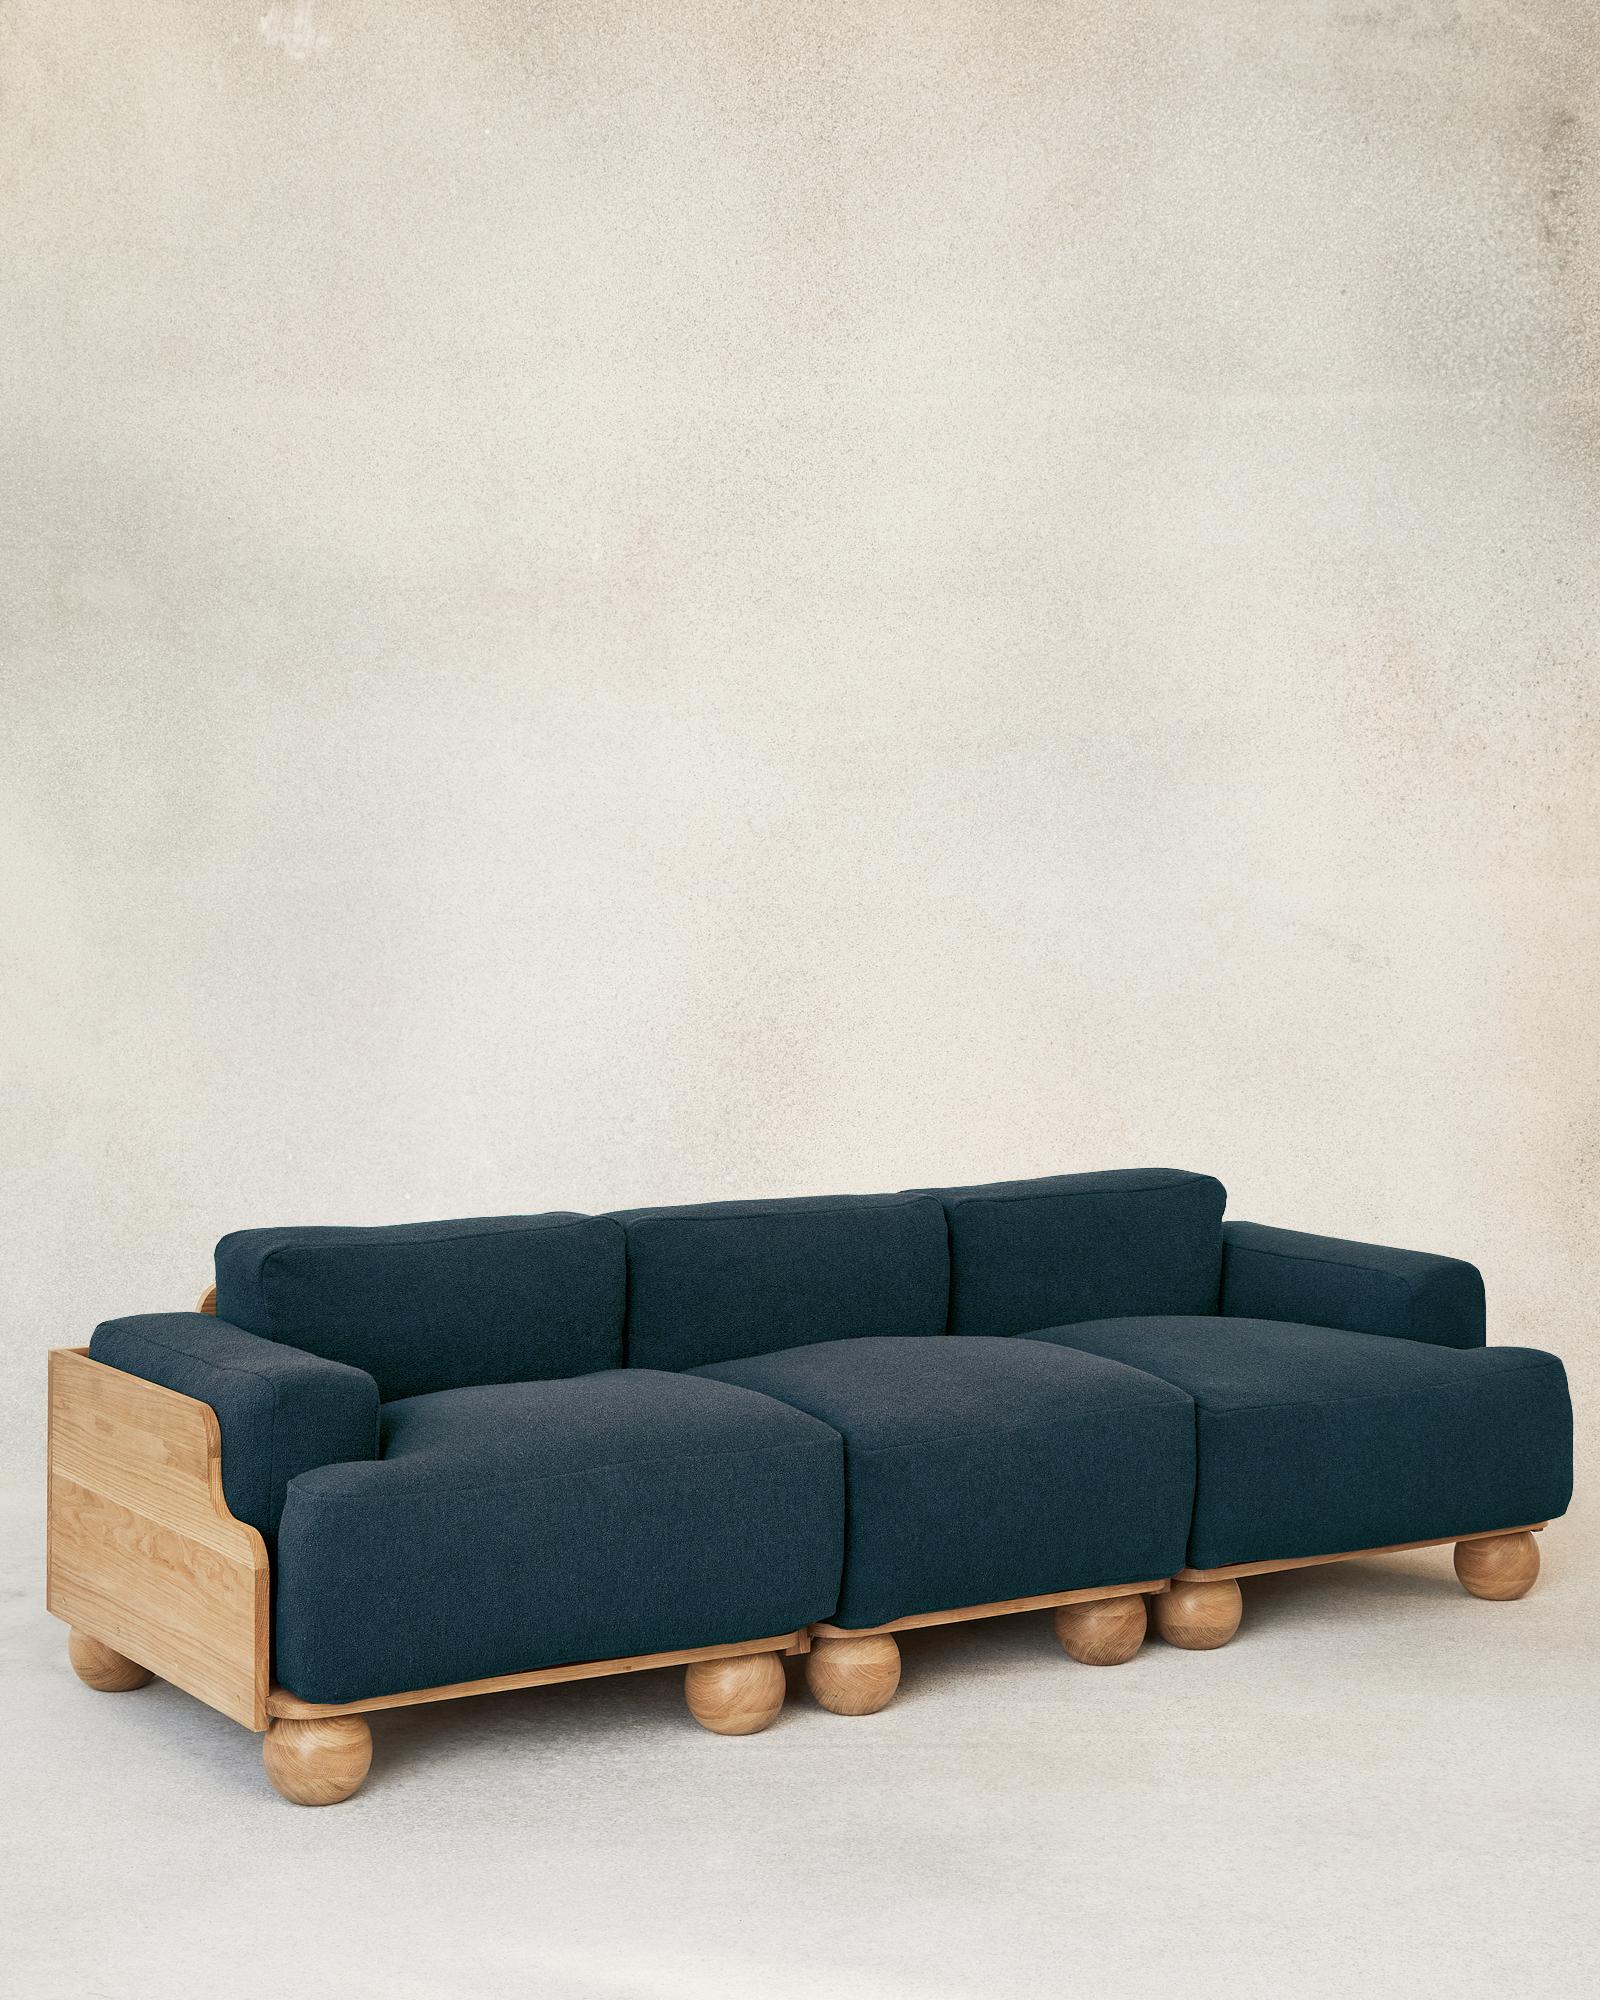 The Cove Sofa’s adapts to any interior environment and beckons to be sat in all day. The modular design allows versatile combinations and lengths of two-, three- or more seaters with or without arms. 

Expanses of sculptural solid oak encase the